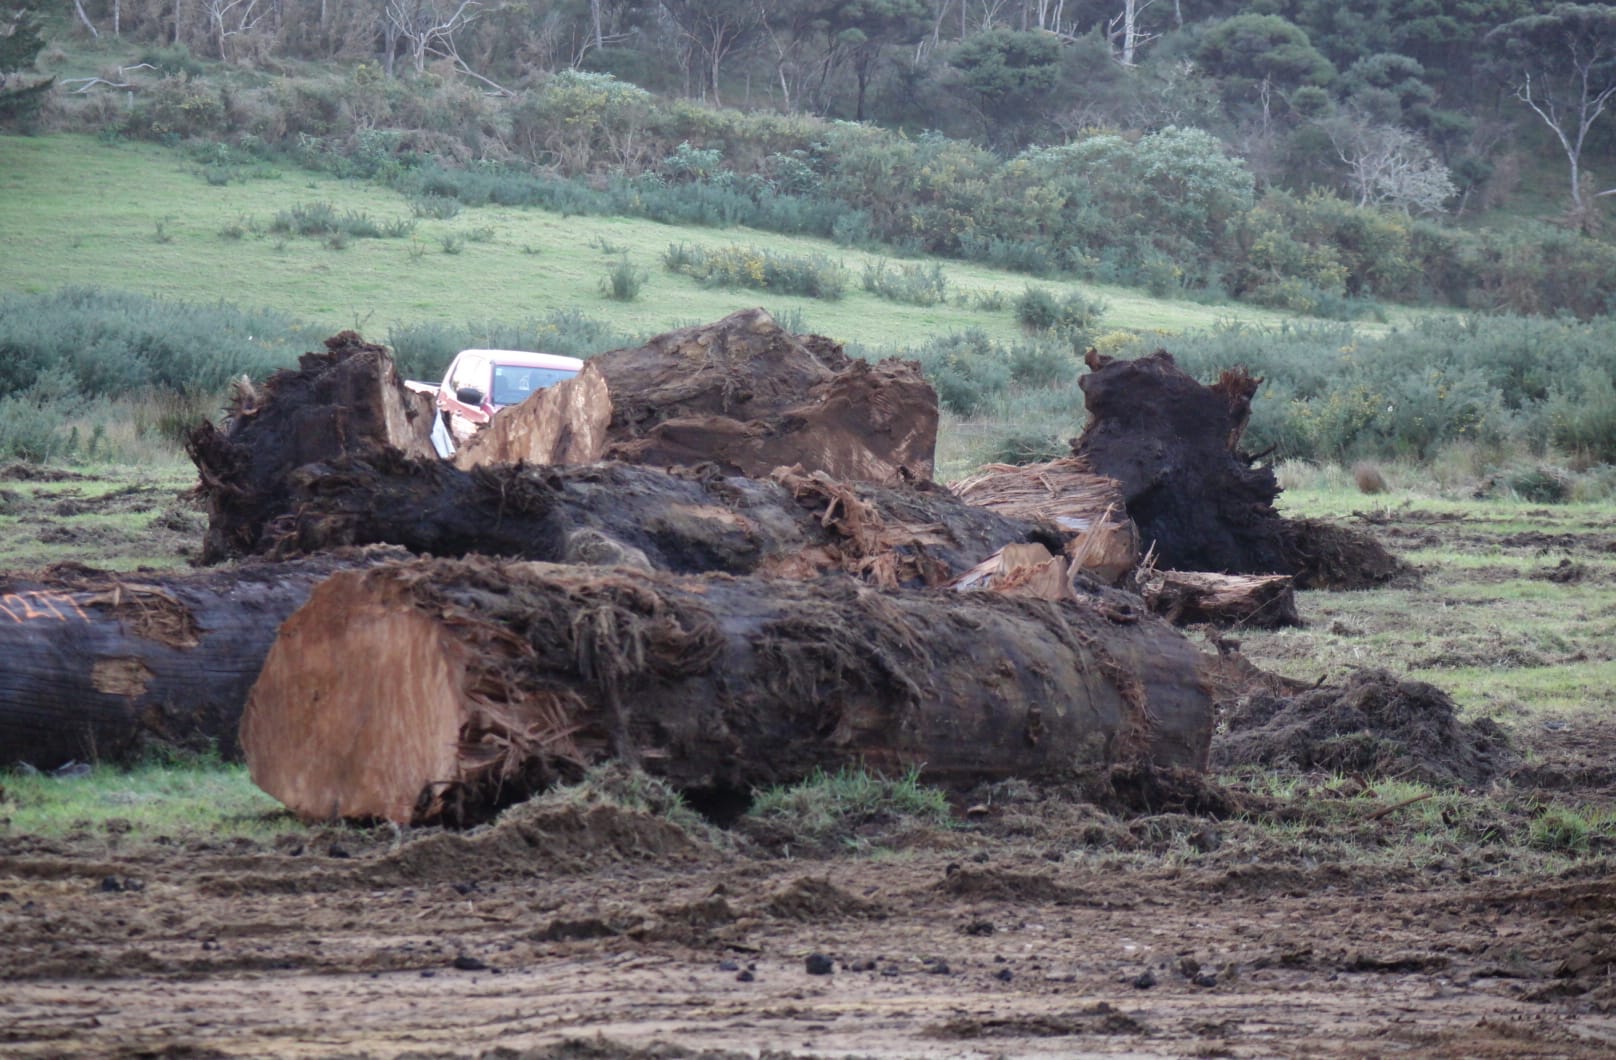 Kauri logs unearthed from peat await sale.